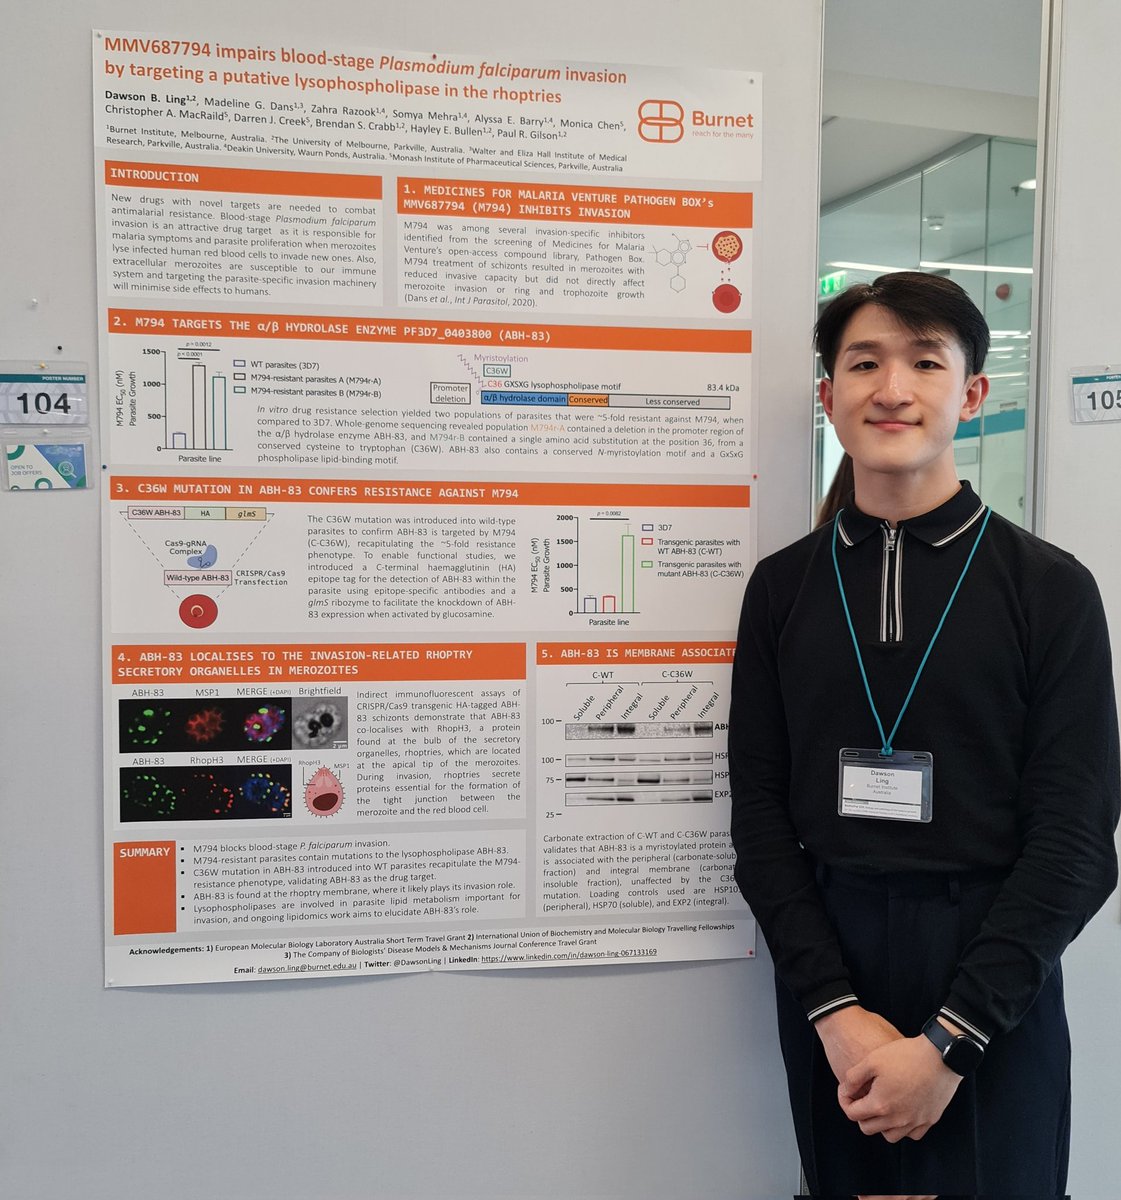 Thanks to #EMBLMalaria for the chance to present at the BioMalPar XIX conference. The breadth of work done in the malaria community is inspiring. I would also like to deeply thank @EMBLAustralia @iubmb @DMM_Journal for making this possible with their generous travel grants.